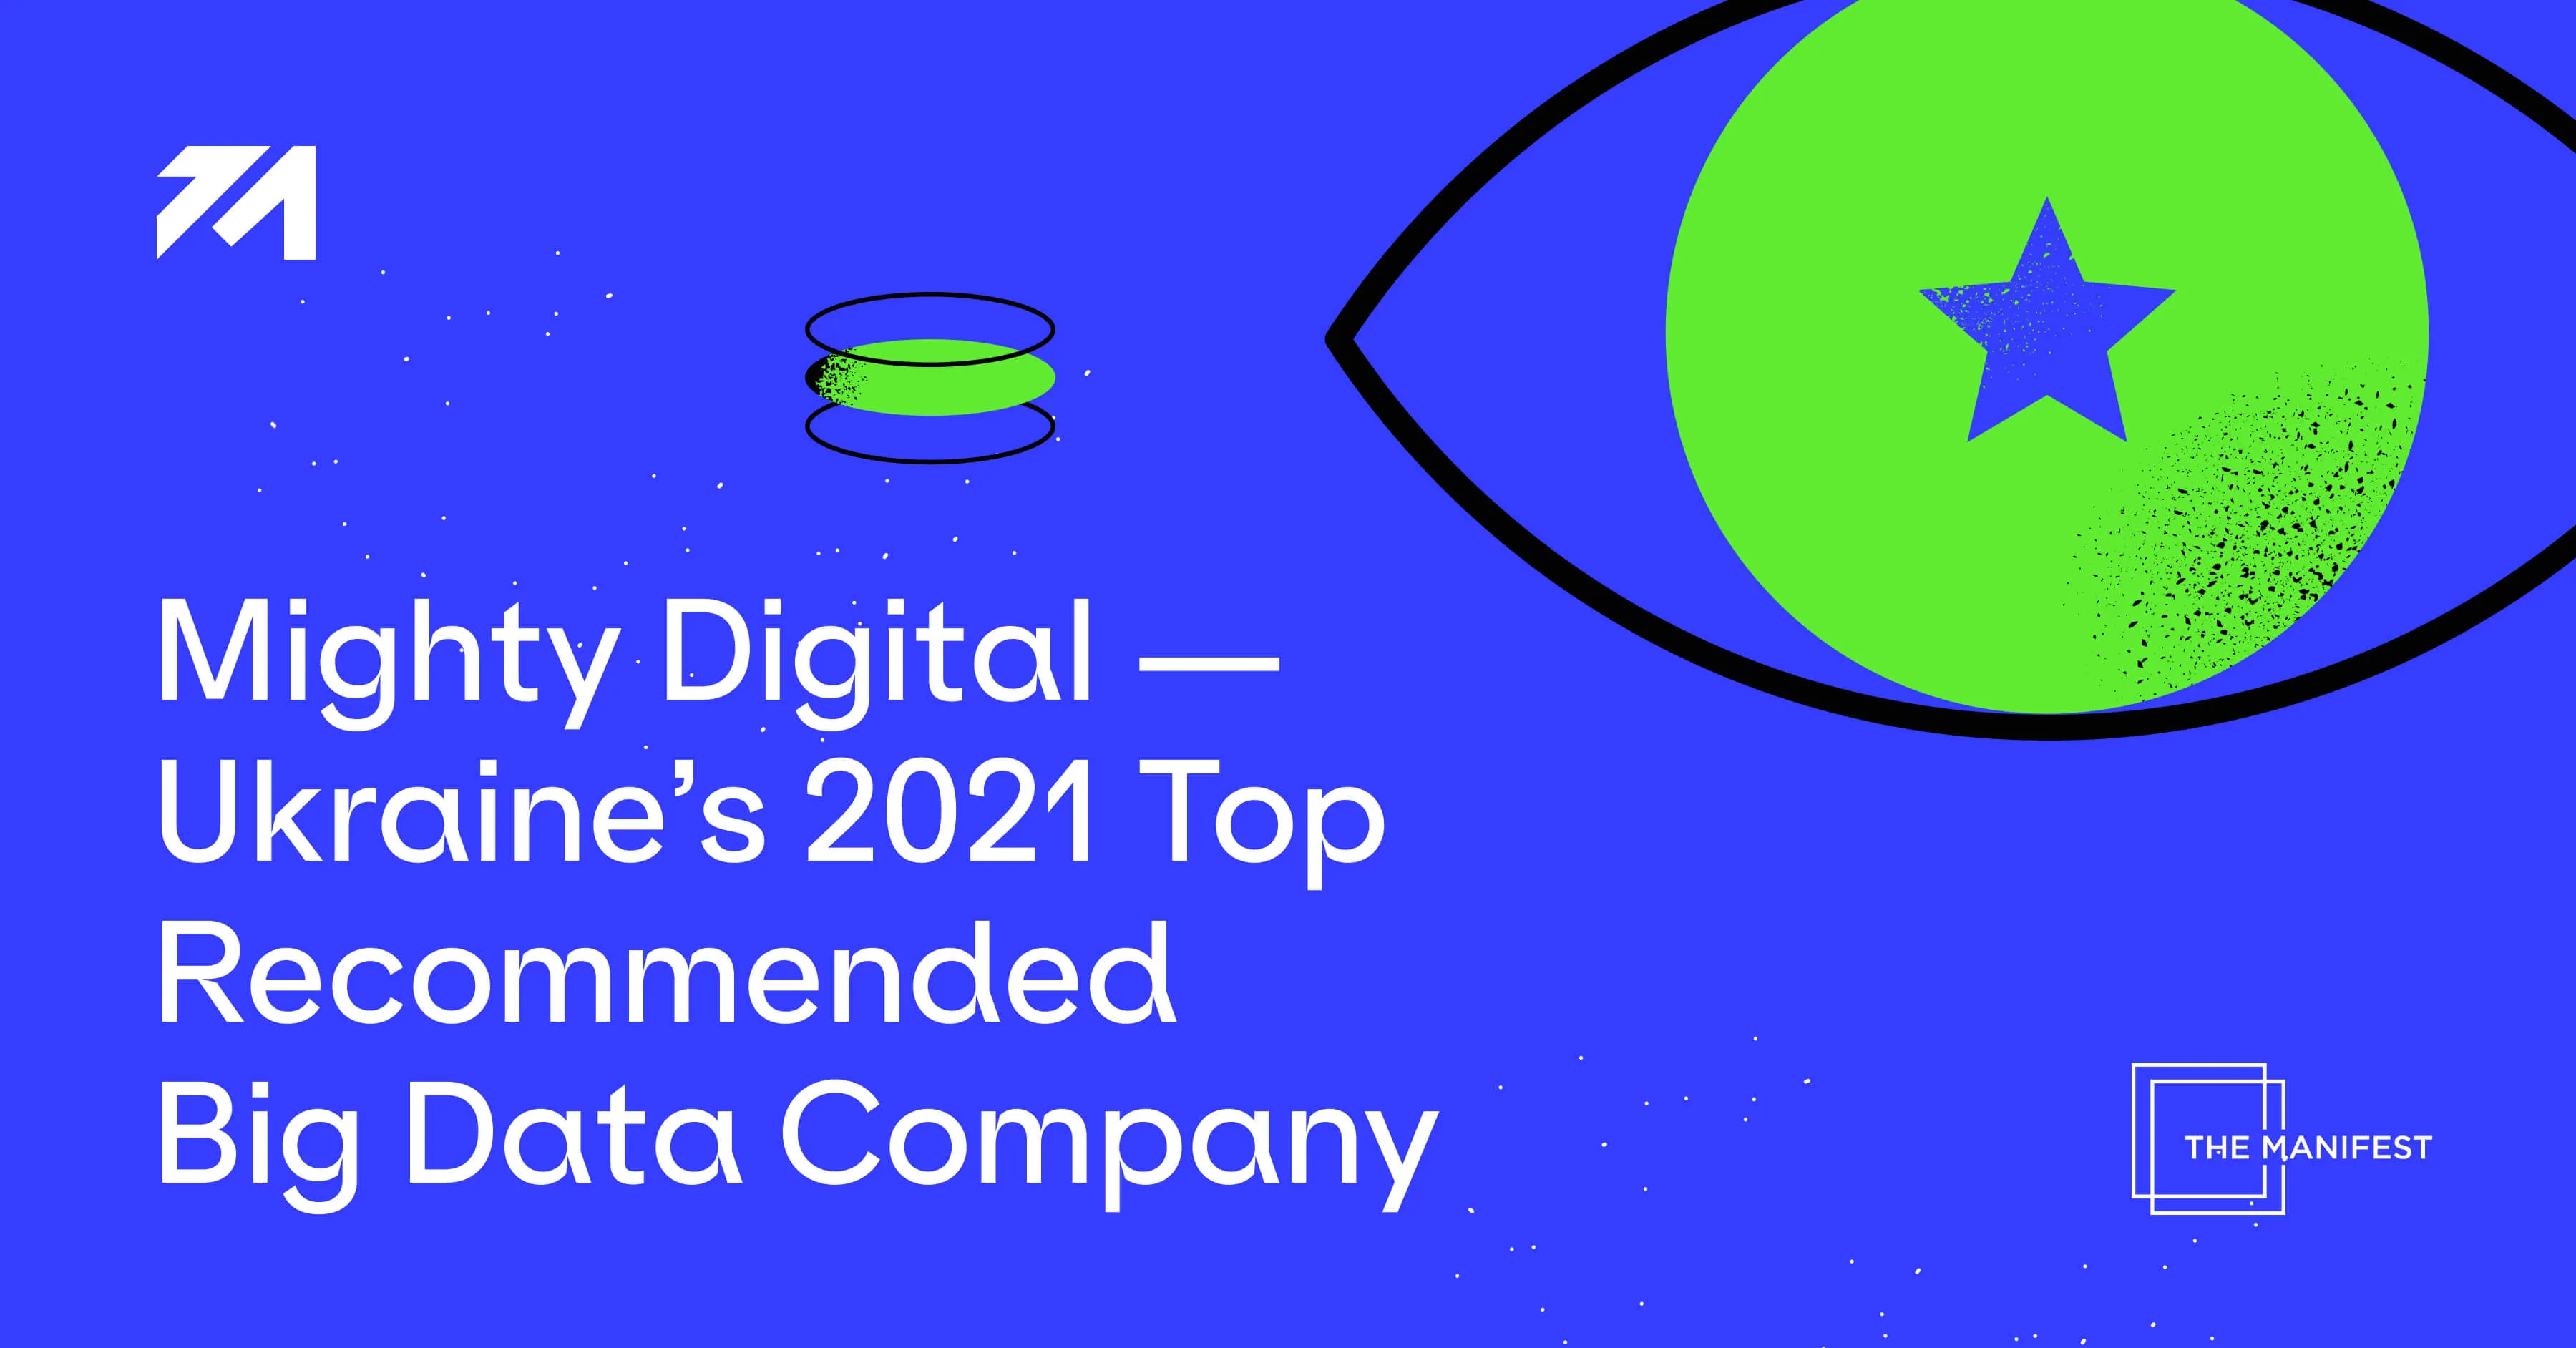 Mighty Digital as Ukraine's 2021 Top Recommended Big Data Company